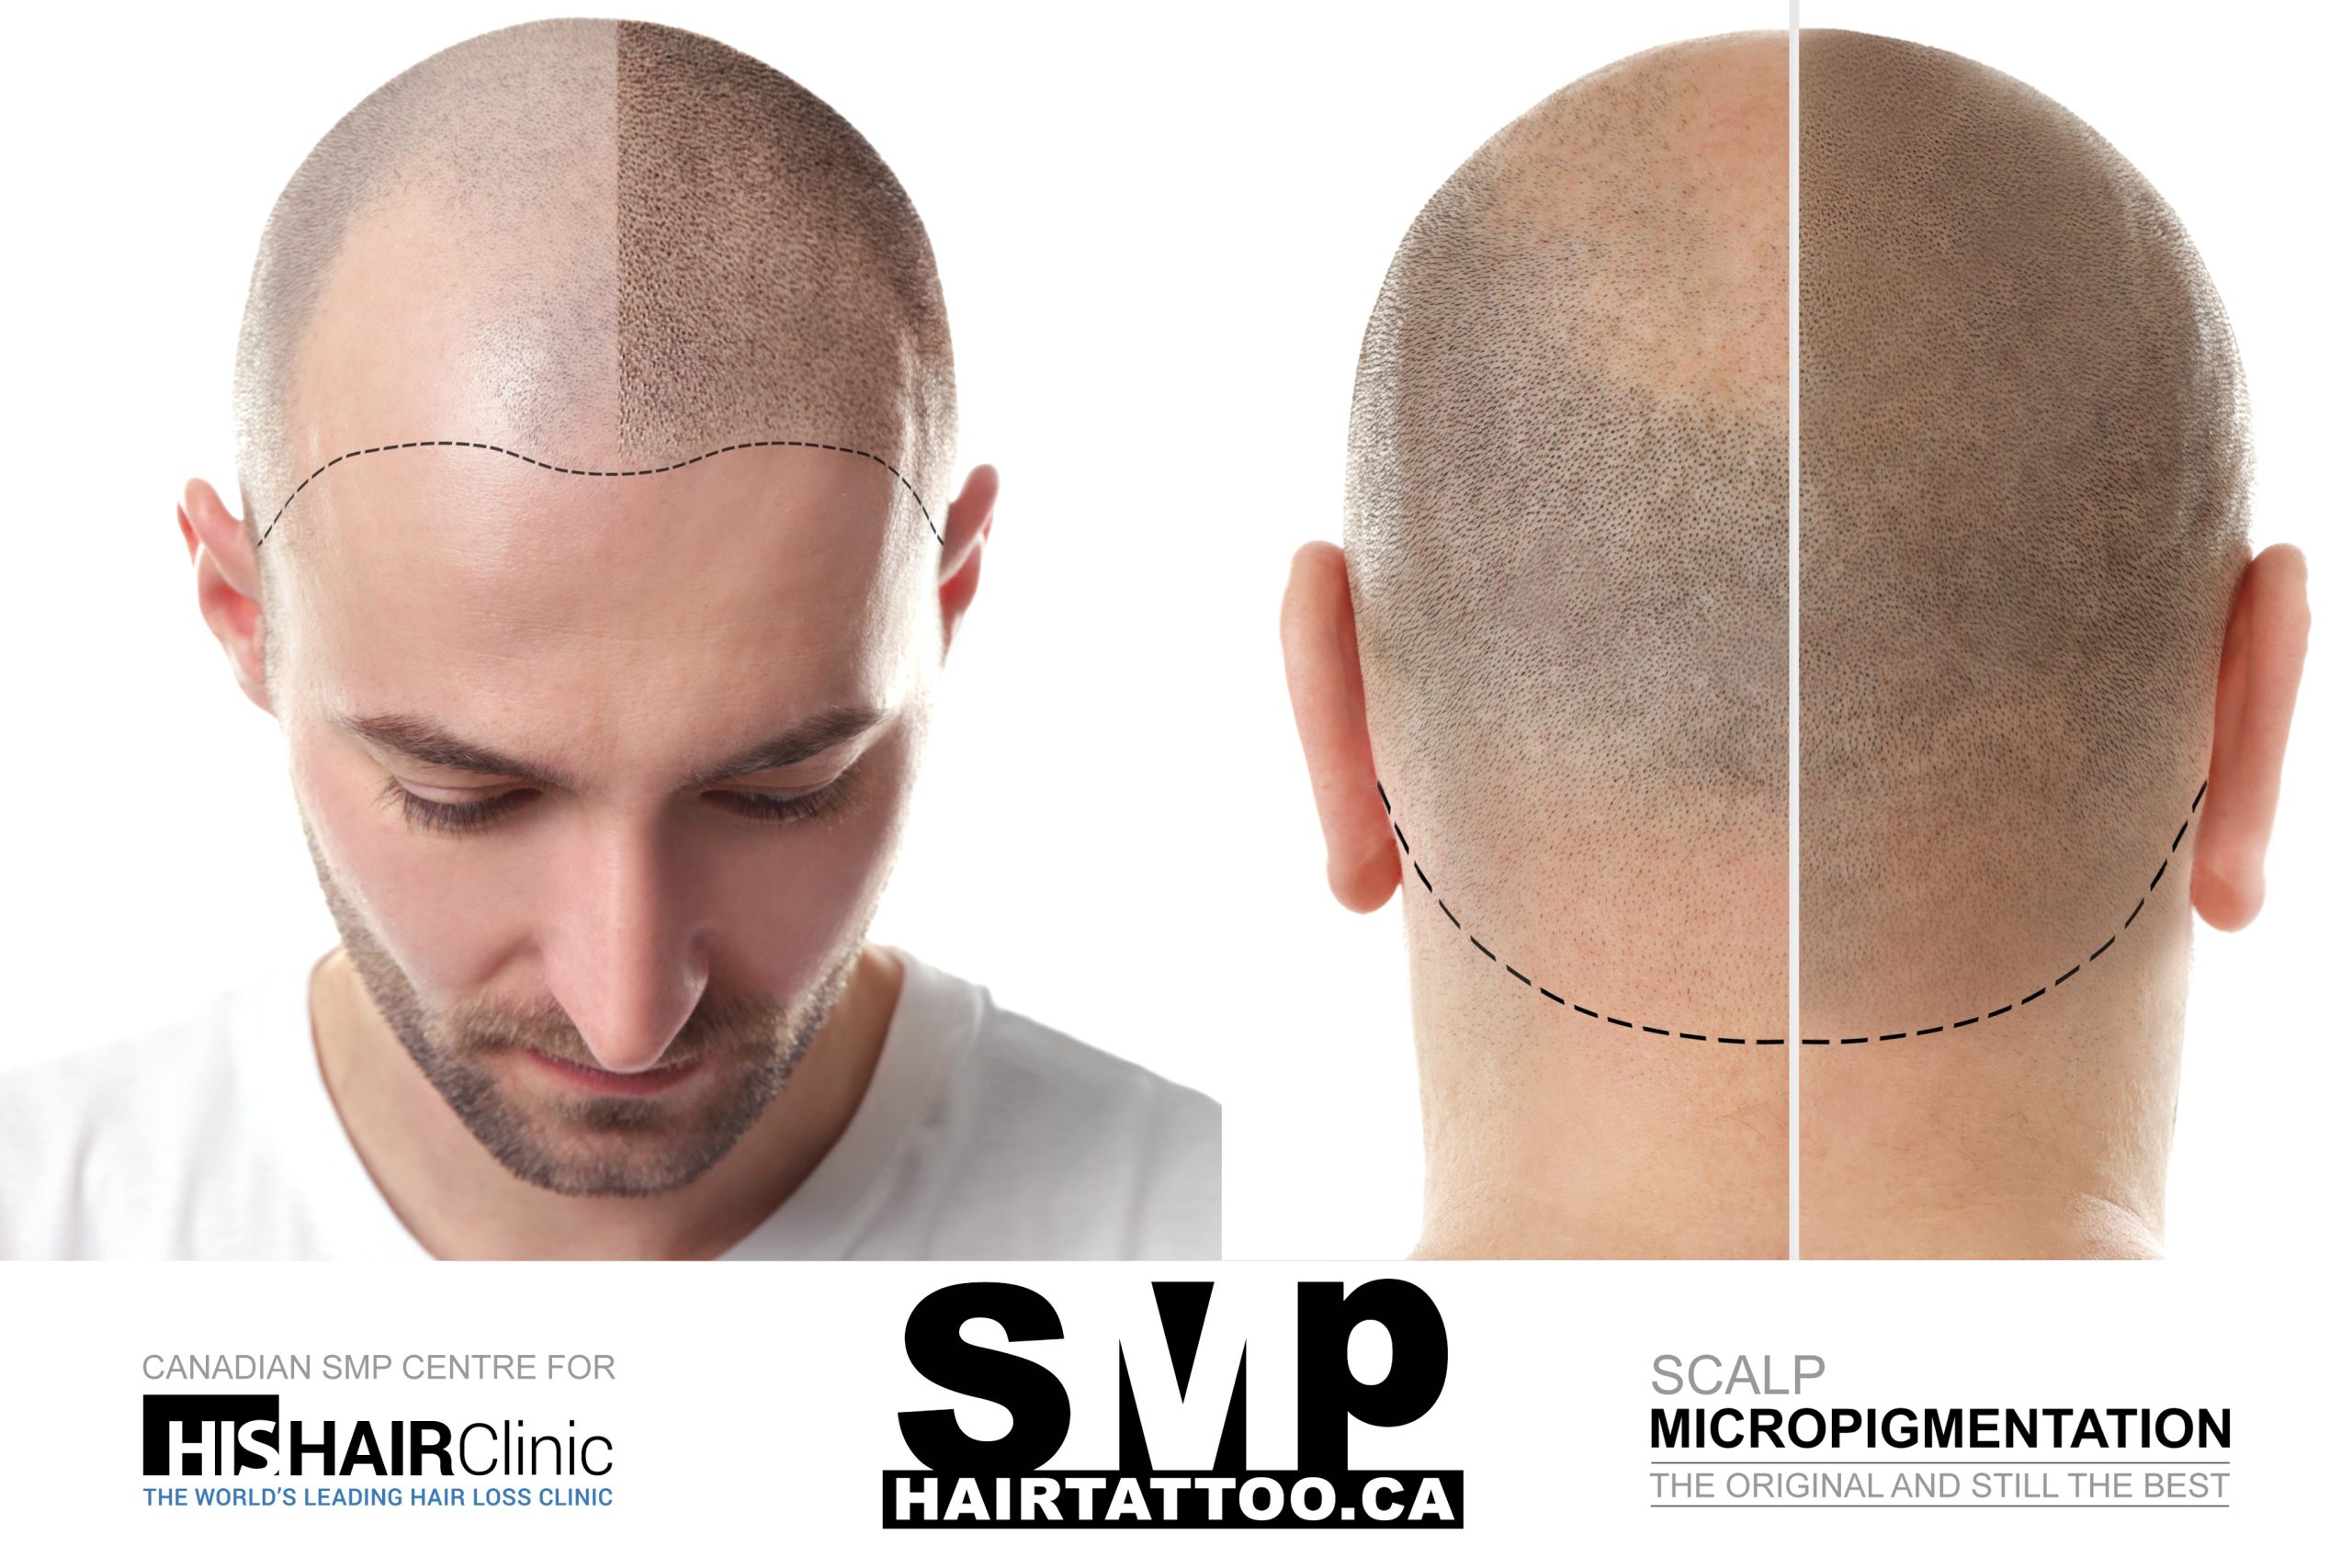 The Side Effects of Scalp Tattoos or Micropigmentation